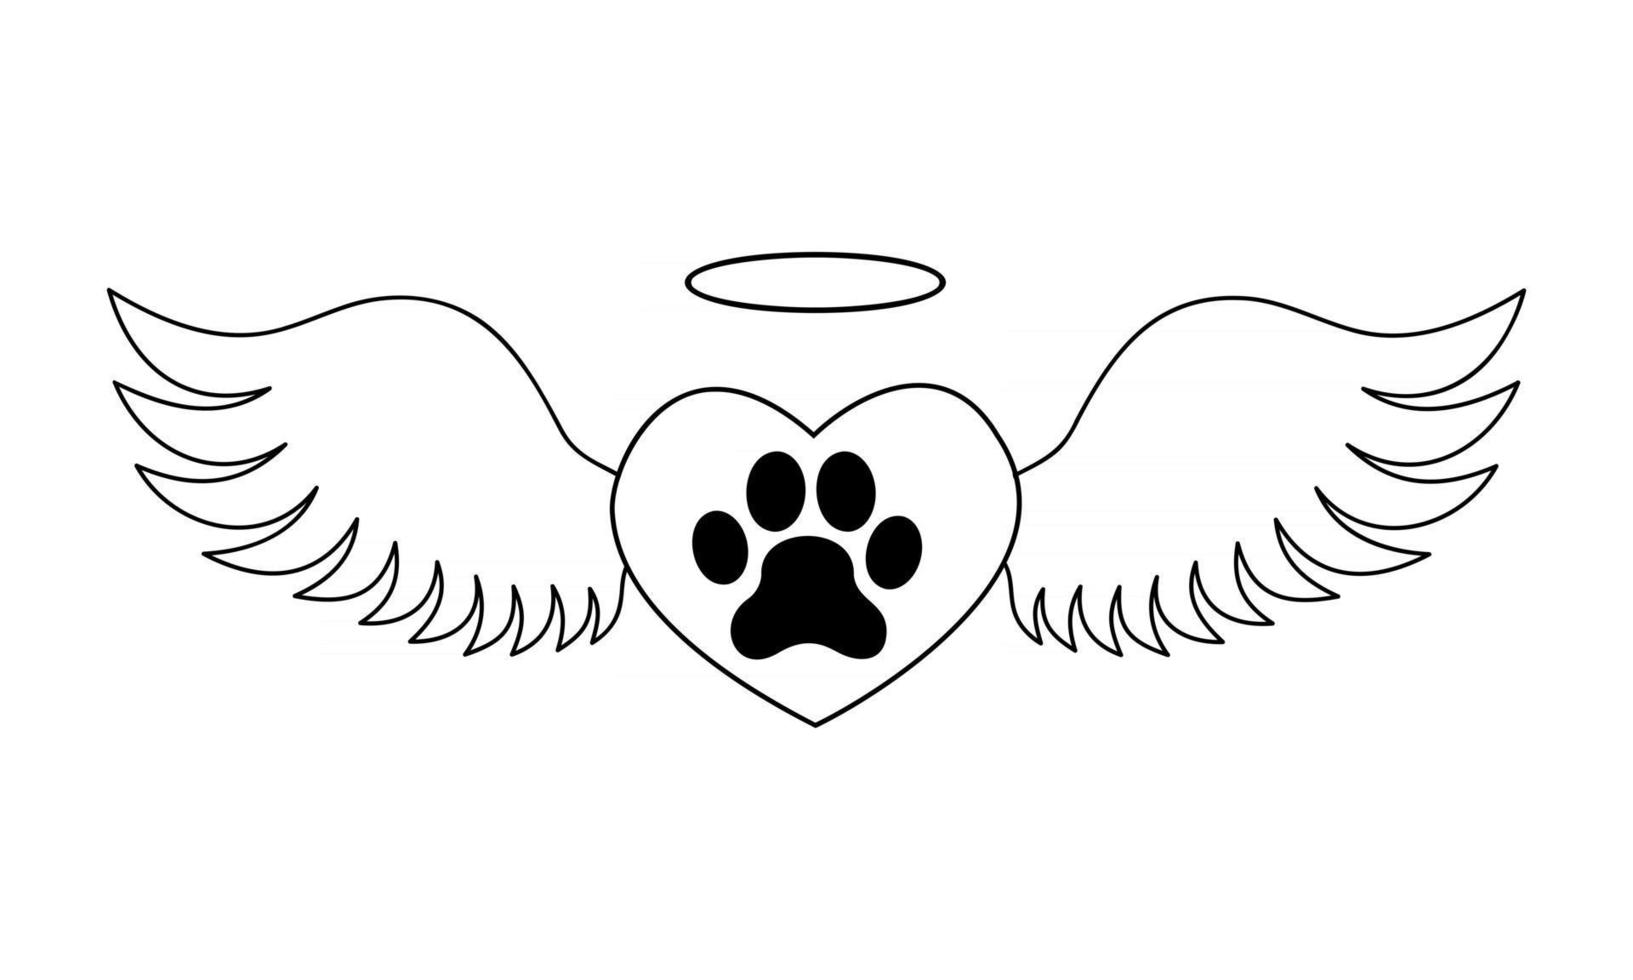 Heart with dogs paw inside with angel wings and halo. Pet death memorial concept. Graphic design for tattoo, tshirt, memory board, tombstone vector